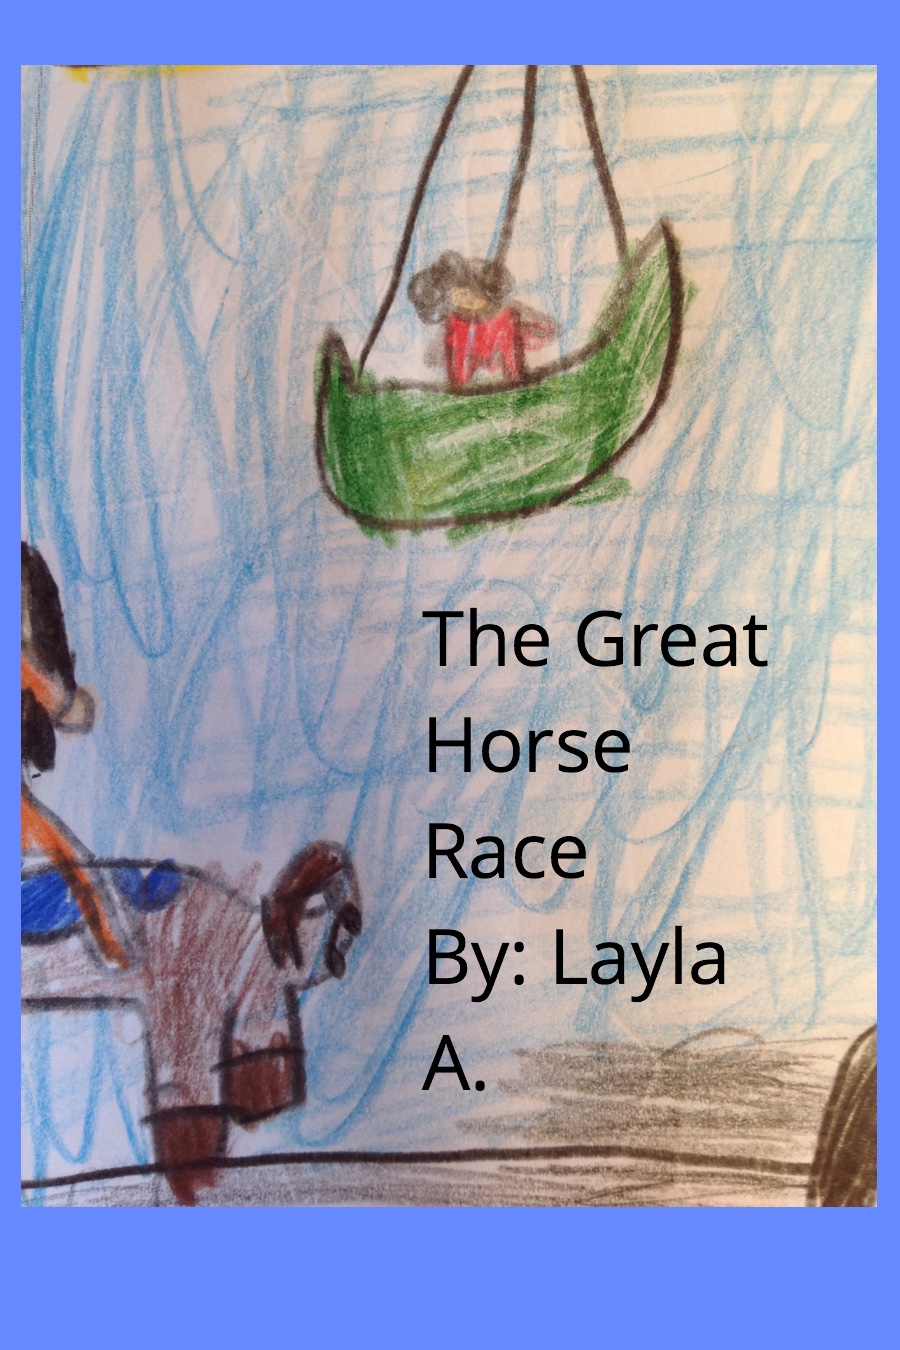 The Great Horse Race by Layla A